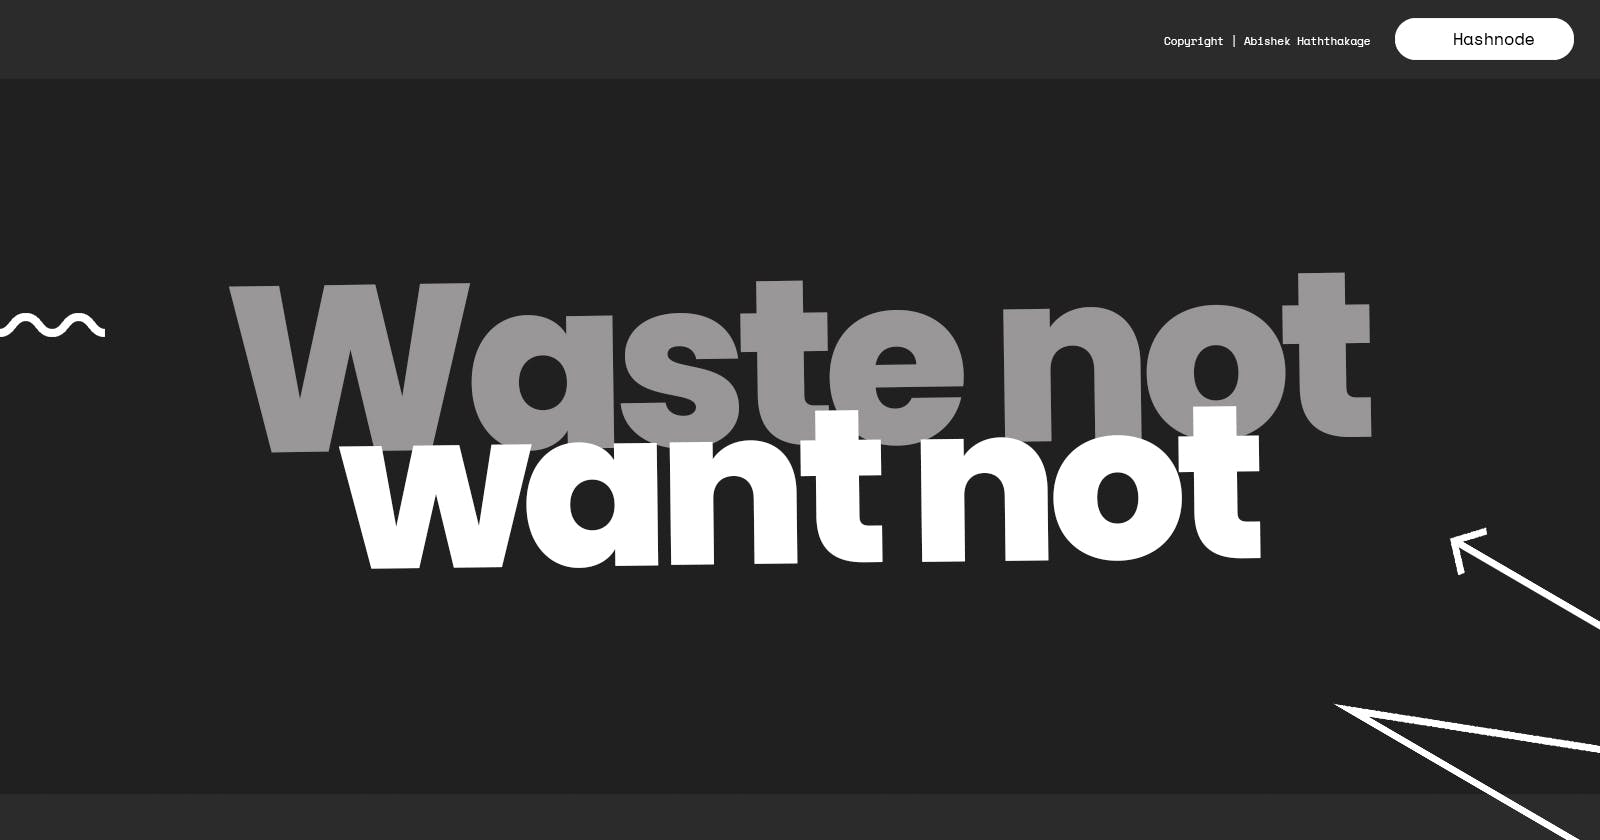 “Waste not, want not.”